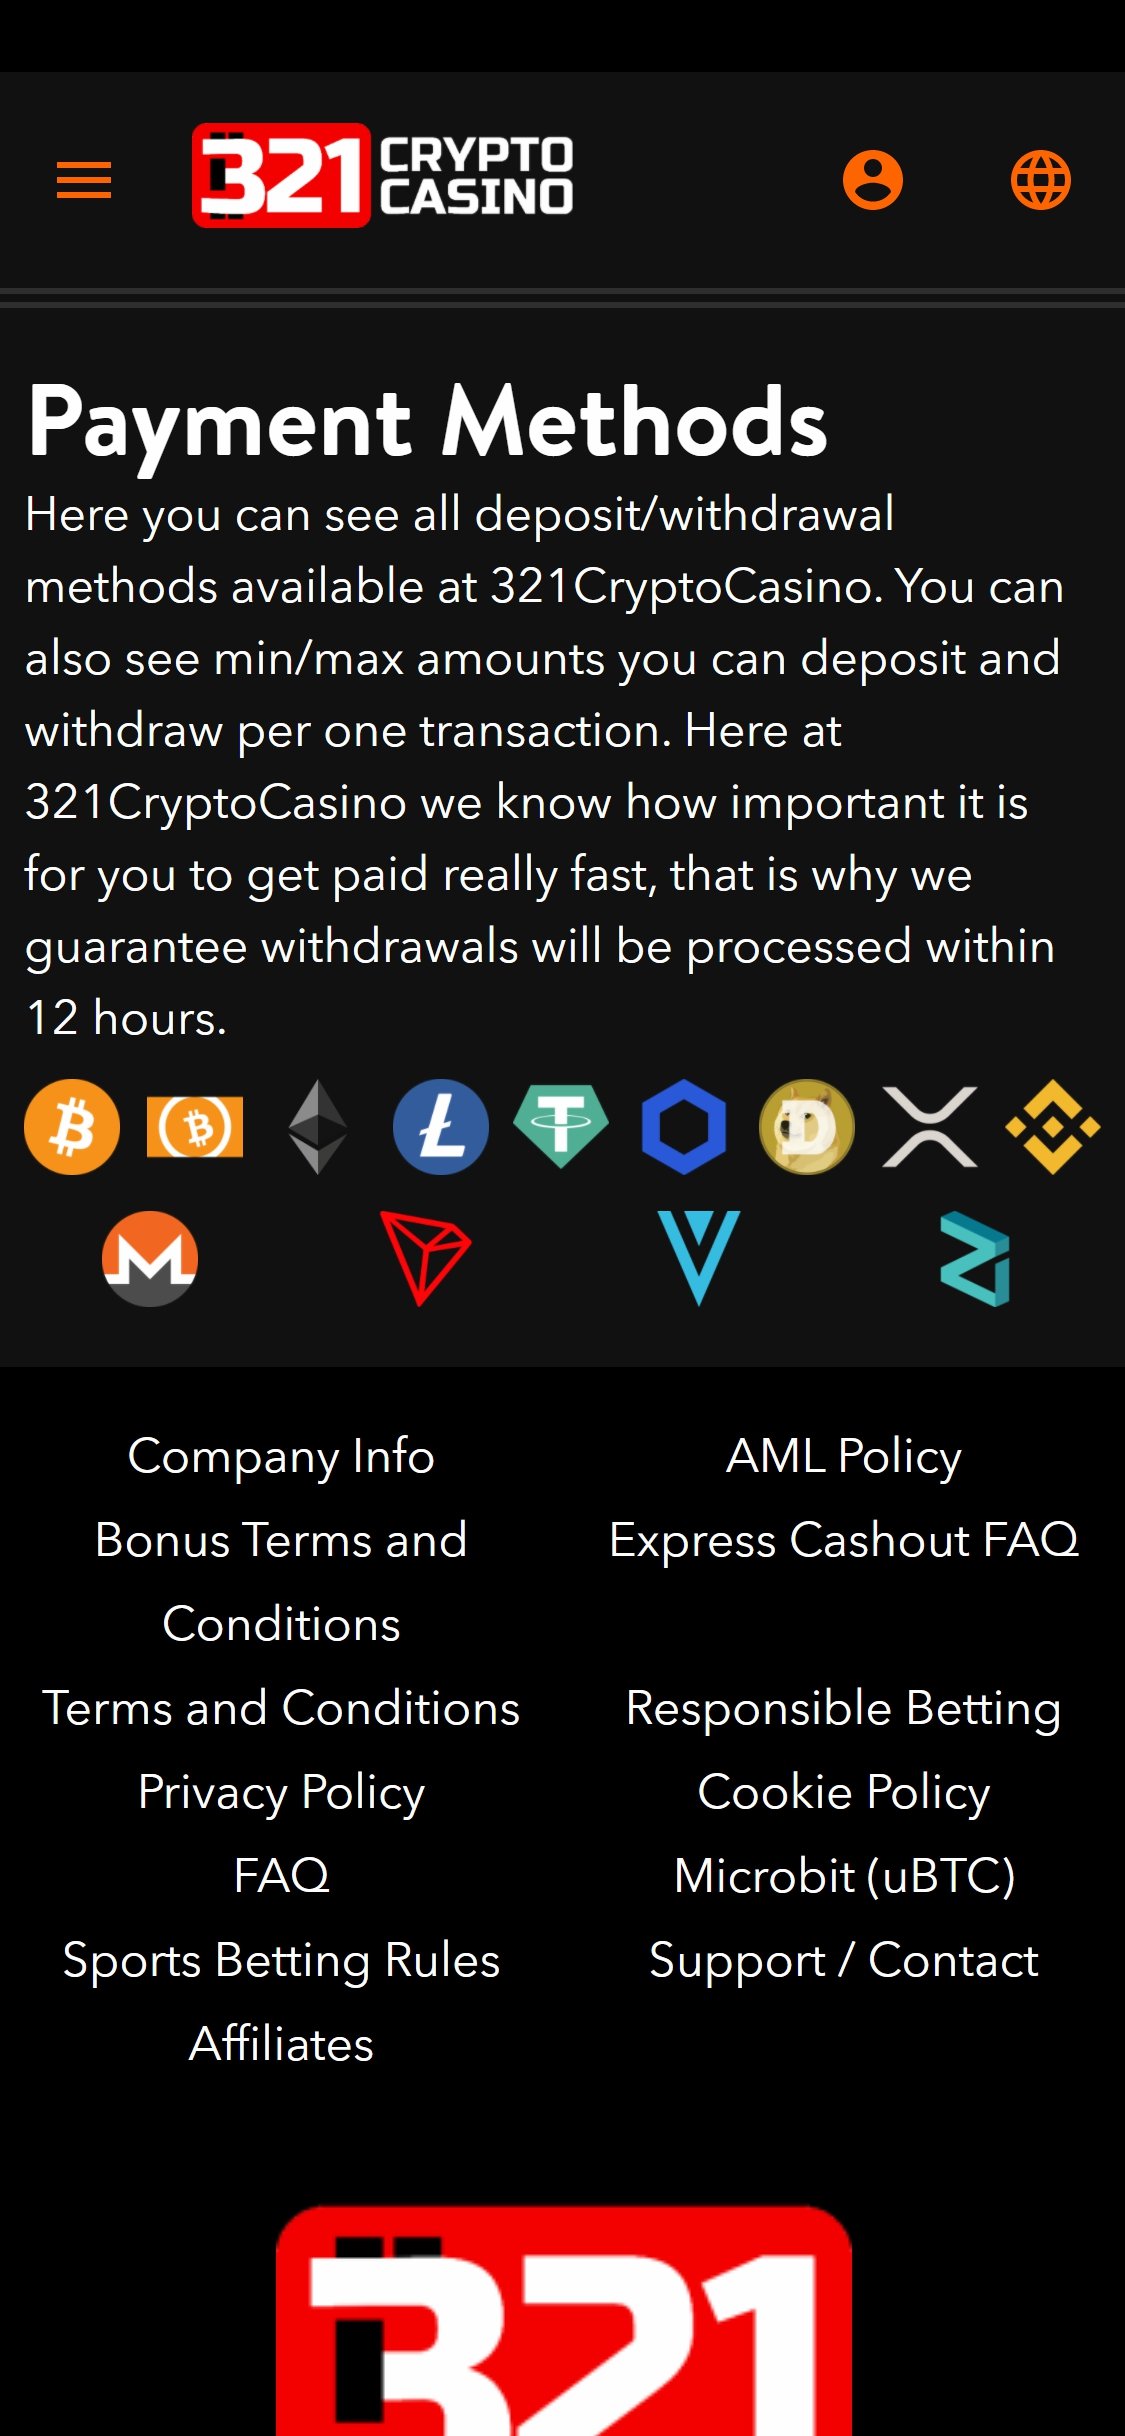 321 Crypto Casino Mobile Payment Methods Review